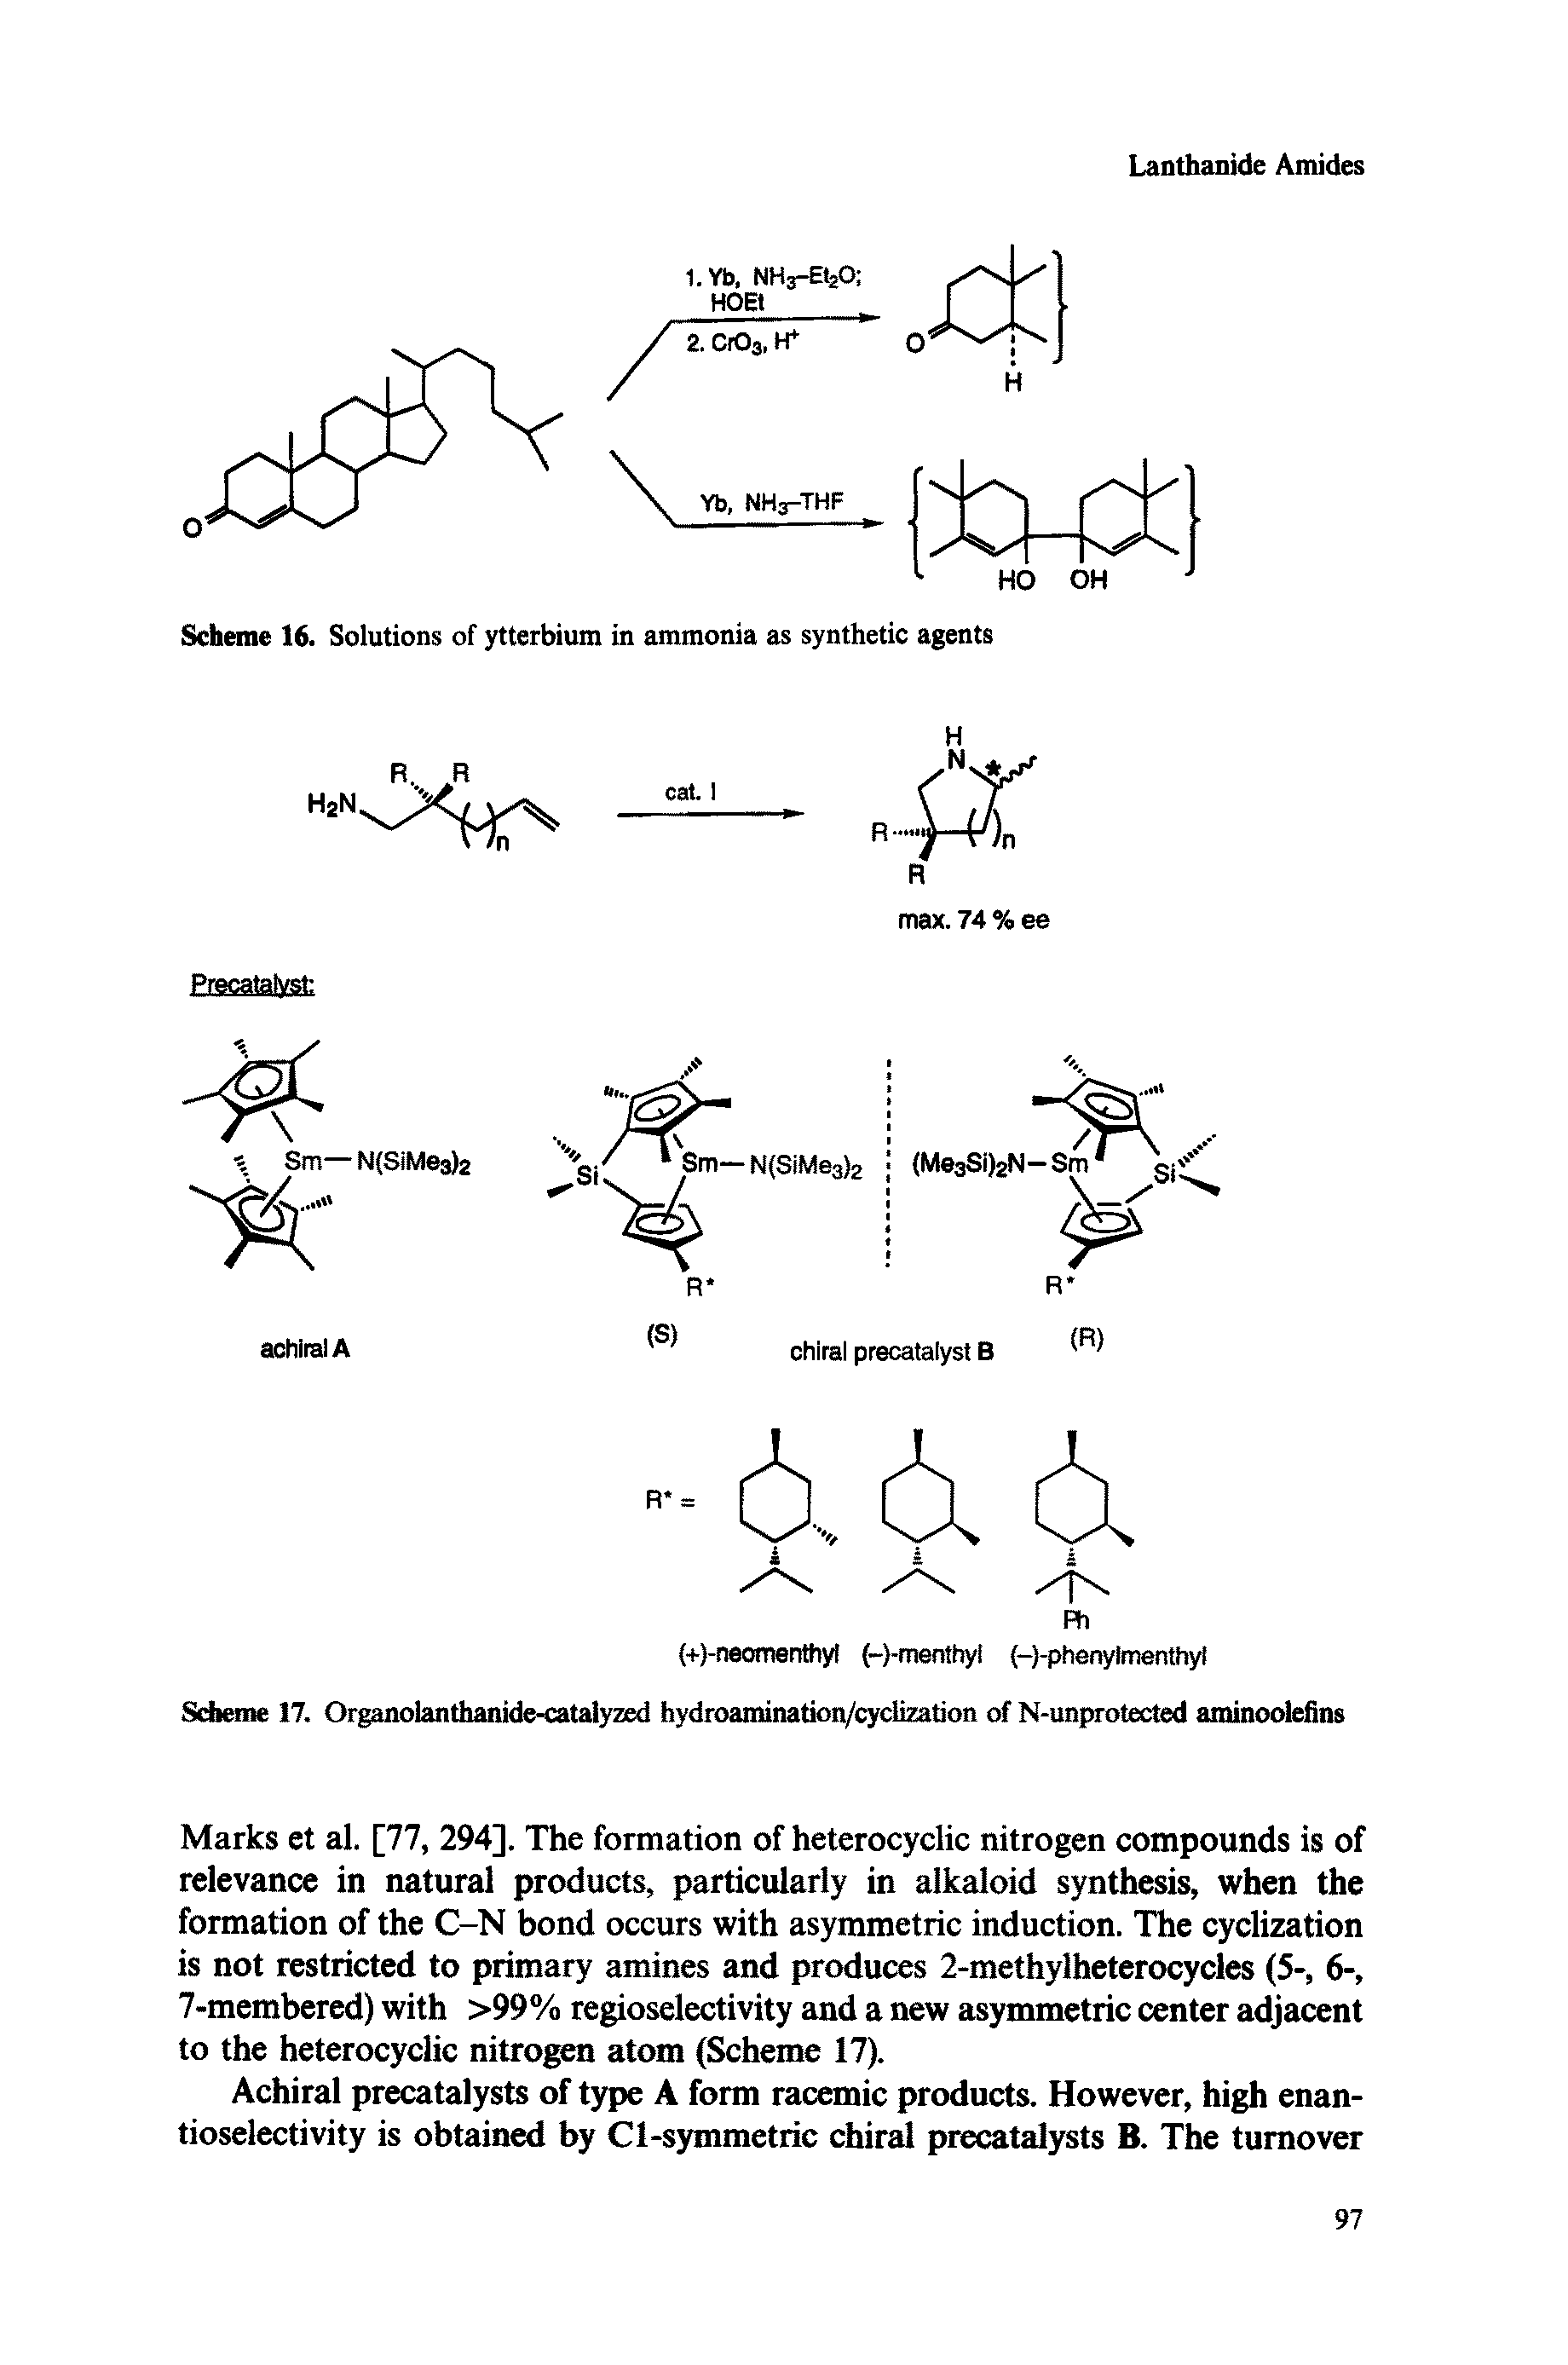 Scheme 16. Solutions of ytterbium in ammonia as synthetic agents...